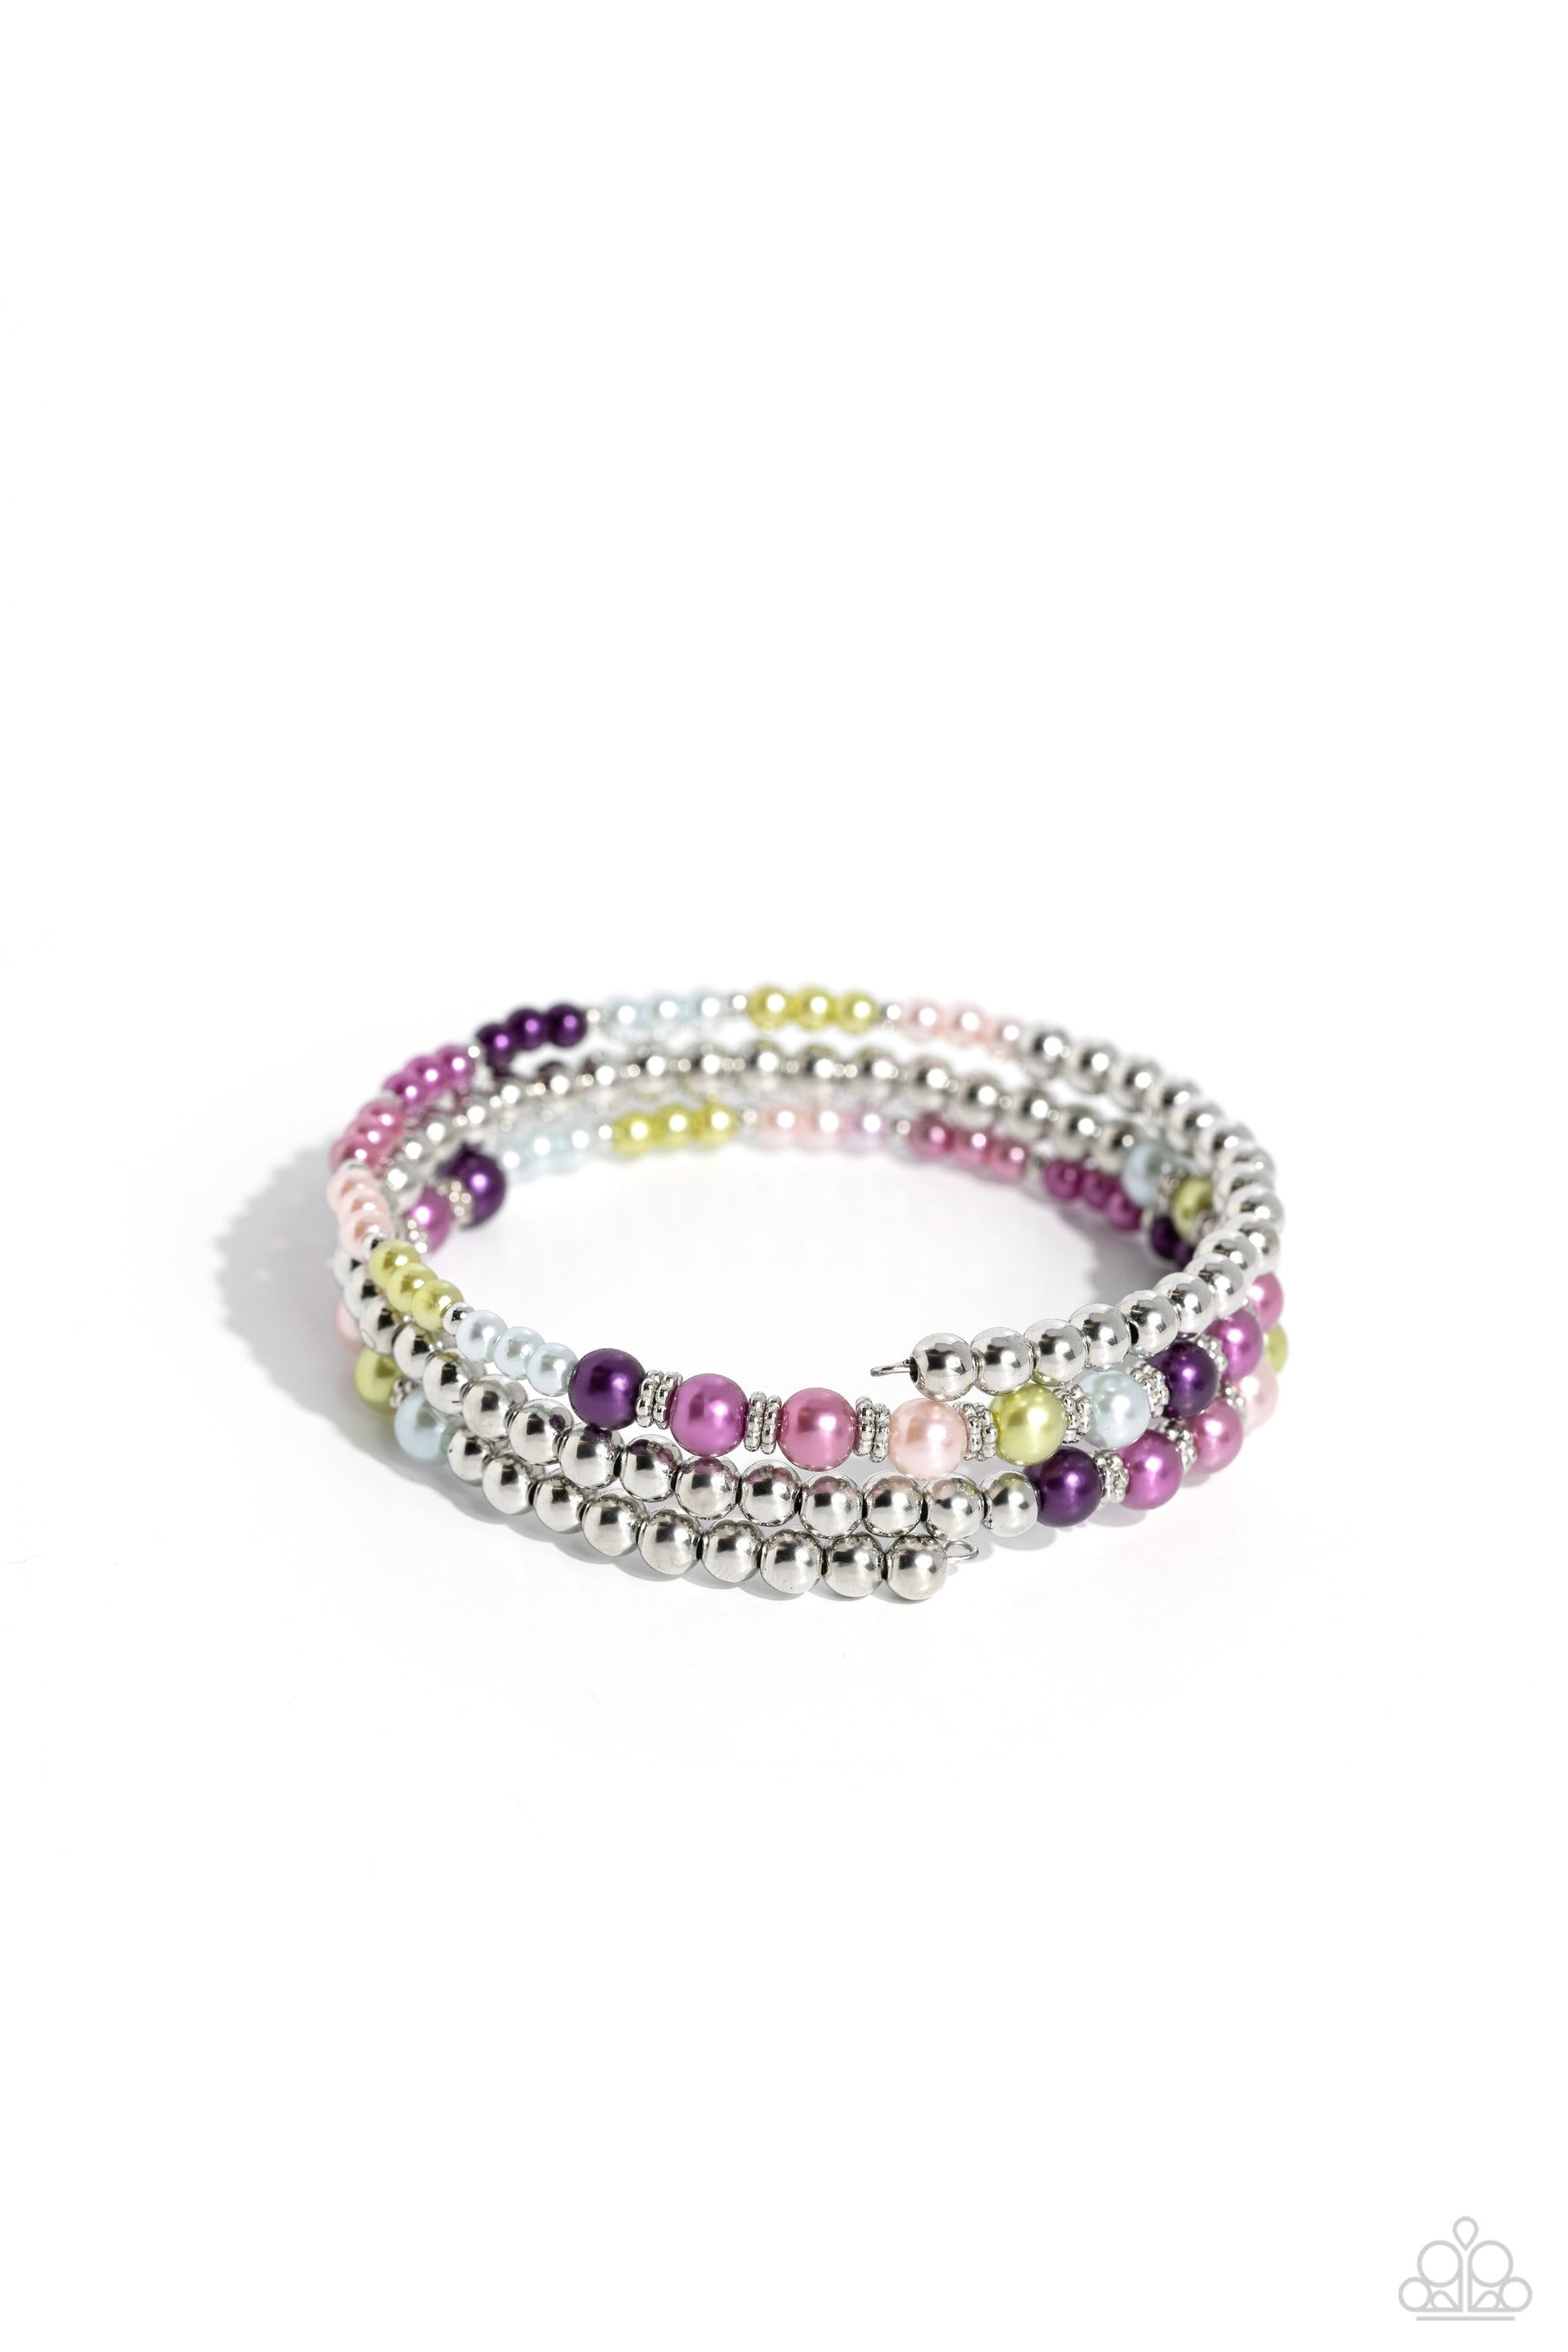 Just SASSING Through Multi Coil Infinity Wrap Bracelet - Paparazzi Accessories  A collection of bright multicolored pearls and shiny silver beads and accents are threaded along a wire that coils around the wrist, creating an eye-catching infinity wrap style bracelet.  Sold as one individual bracelet.  P9RE-MTXX-144QU  New Kit Get The Complete Look! Necklace: "SASS with Flying Colors - Multi" (Sold Separately)